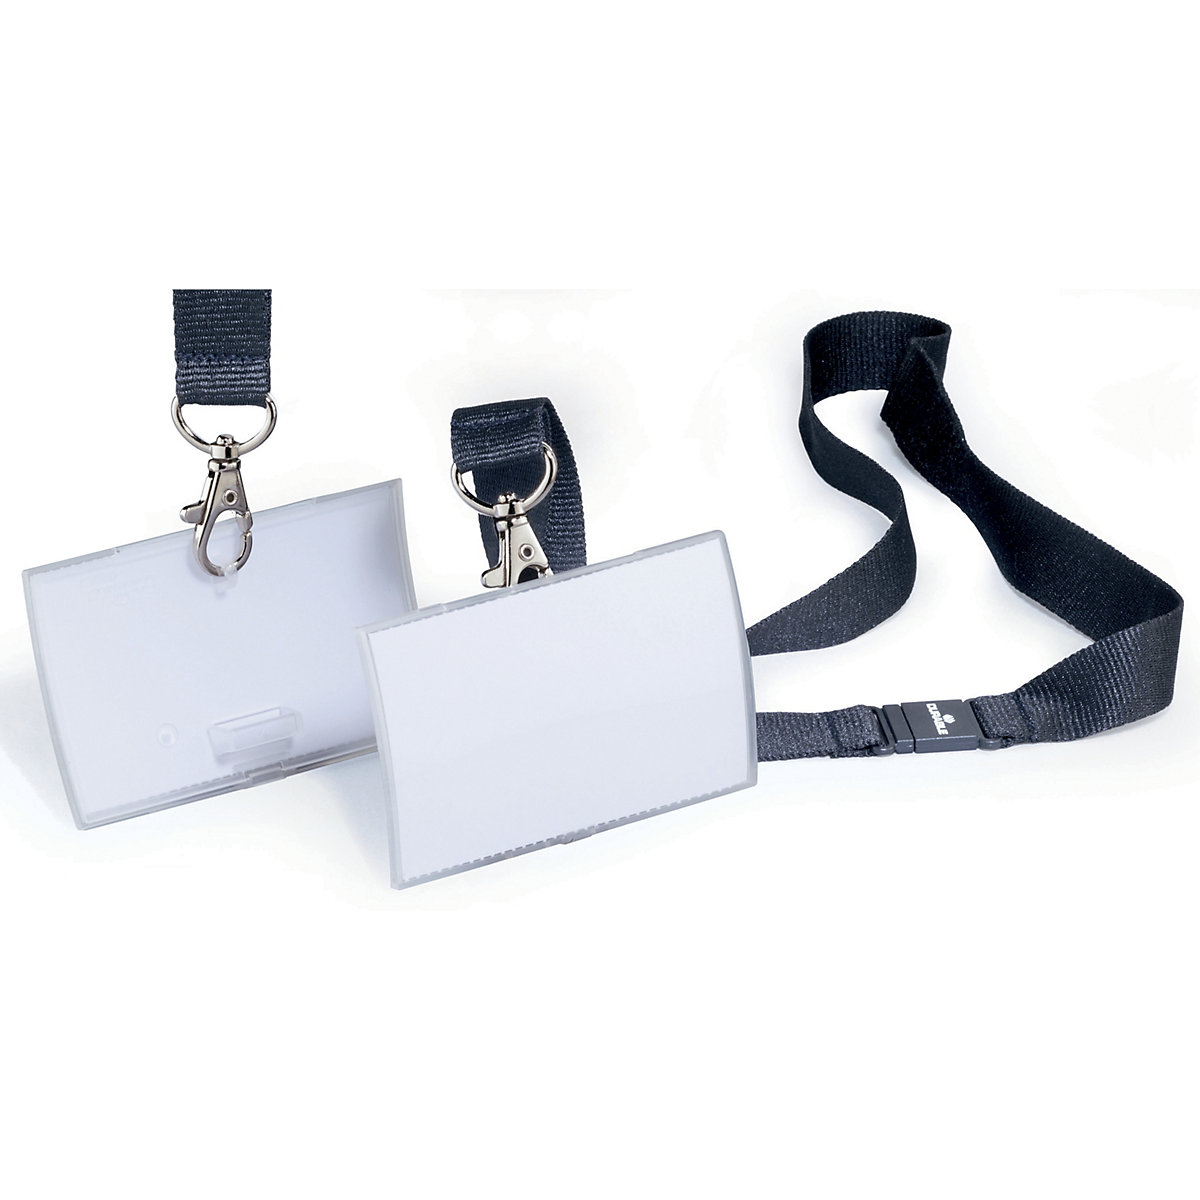 CLICK FOLD met textielband - DURABLE